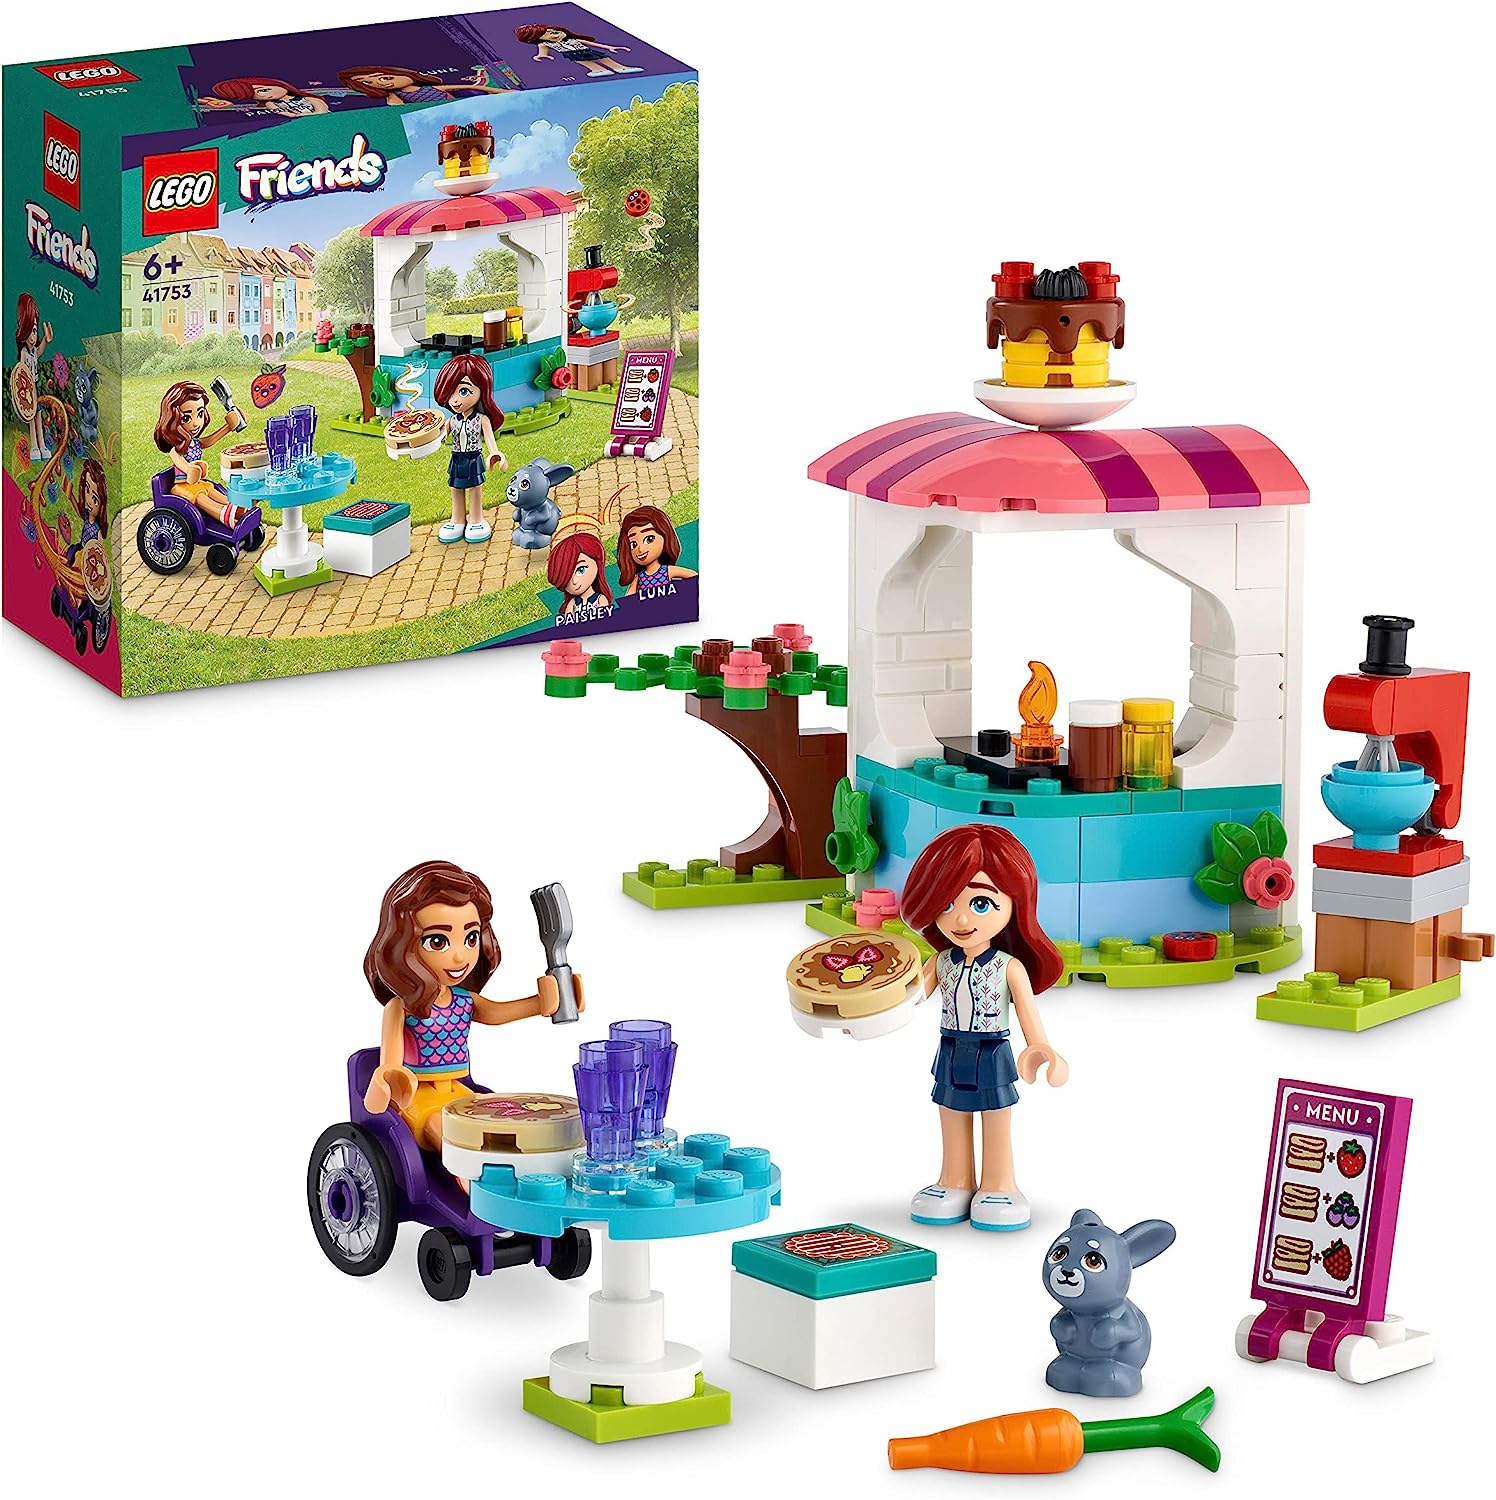 LEGO 41753 Friends Pancake Shop Set, Creative Toy For Boys and Girls from 6 years with paisley and luna mini Dolls and Rabbit Figure, Gift for Children